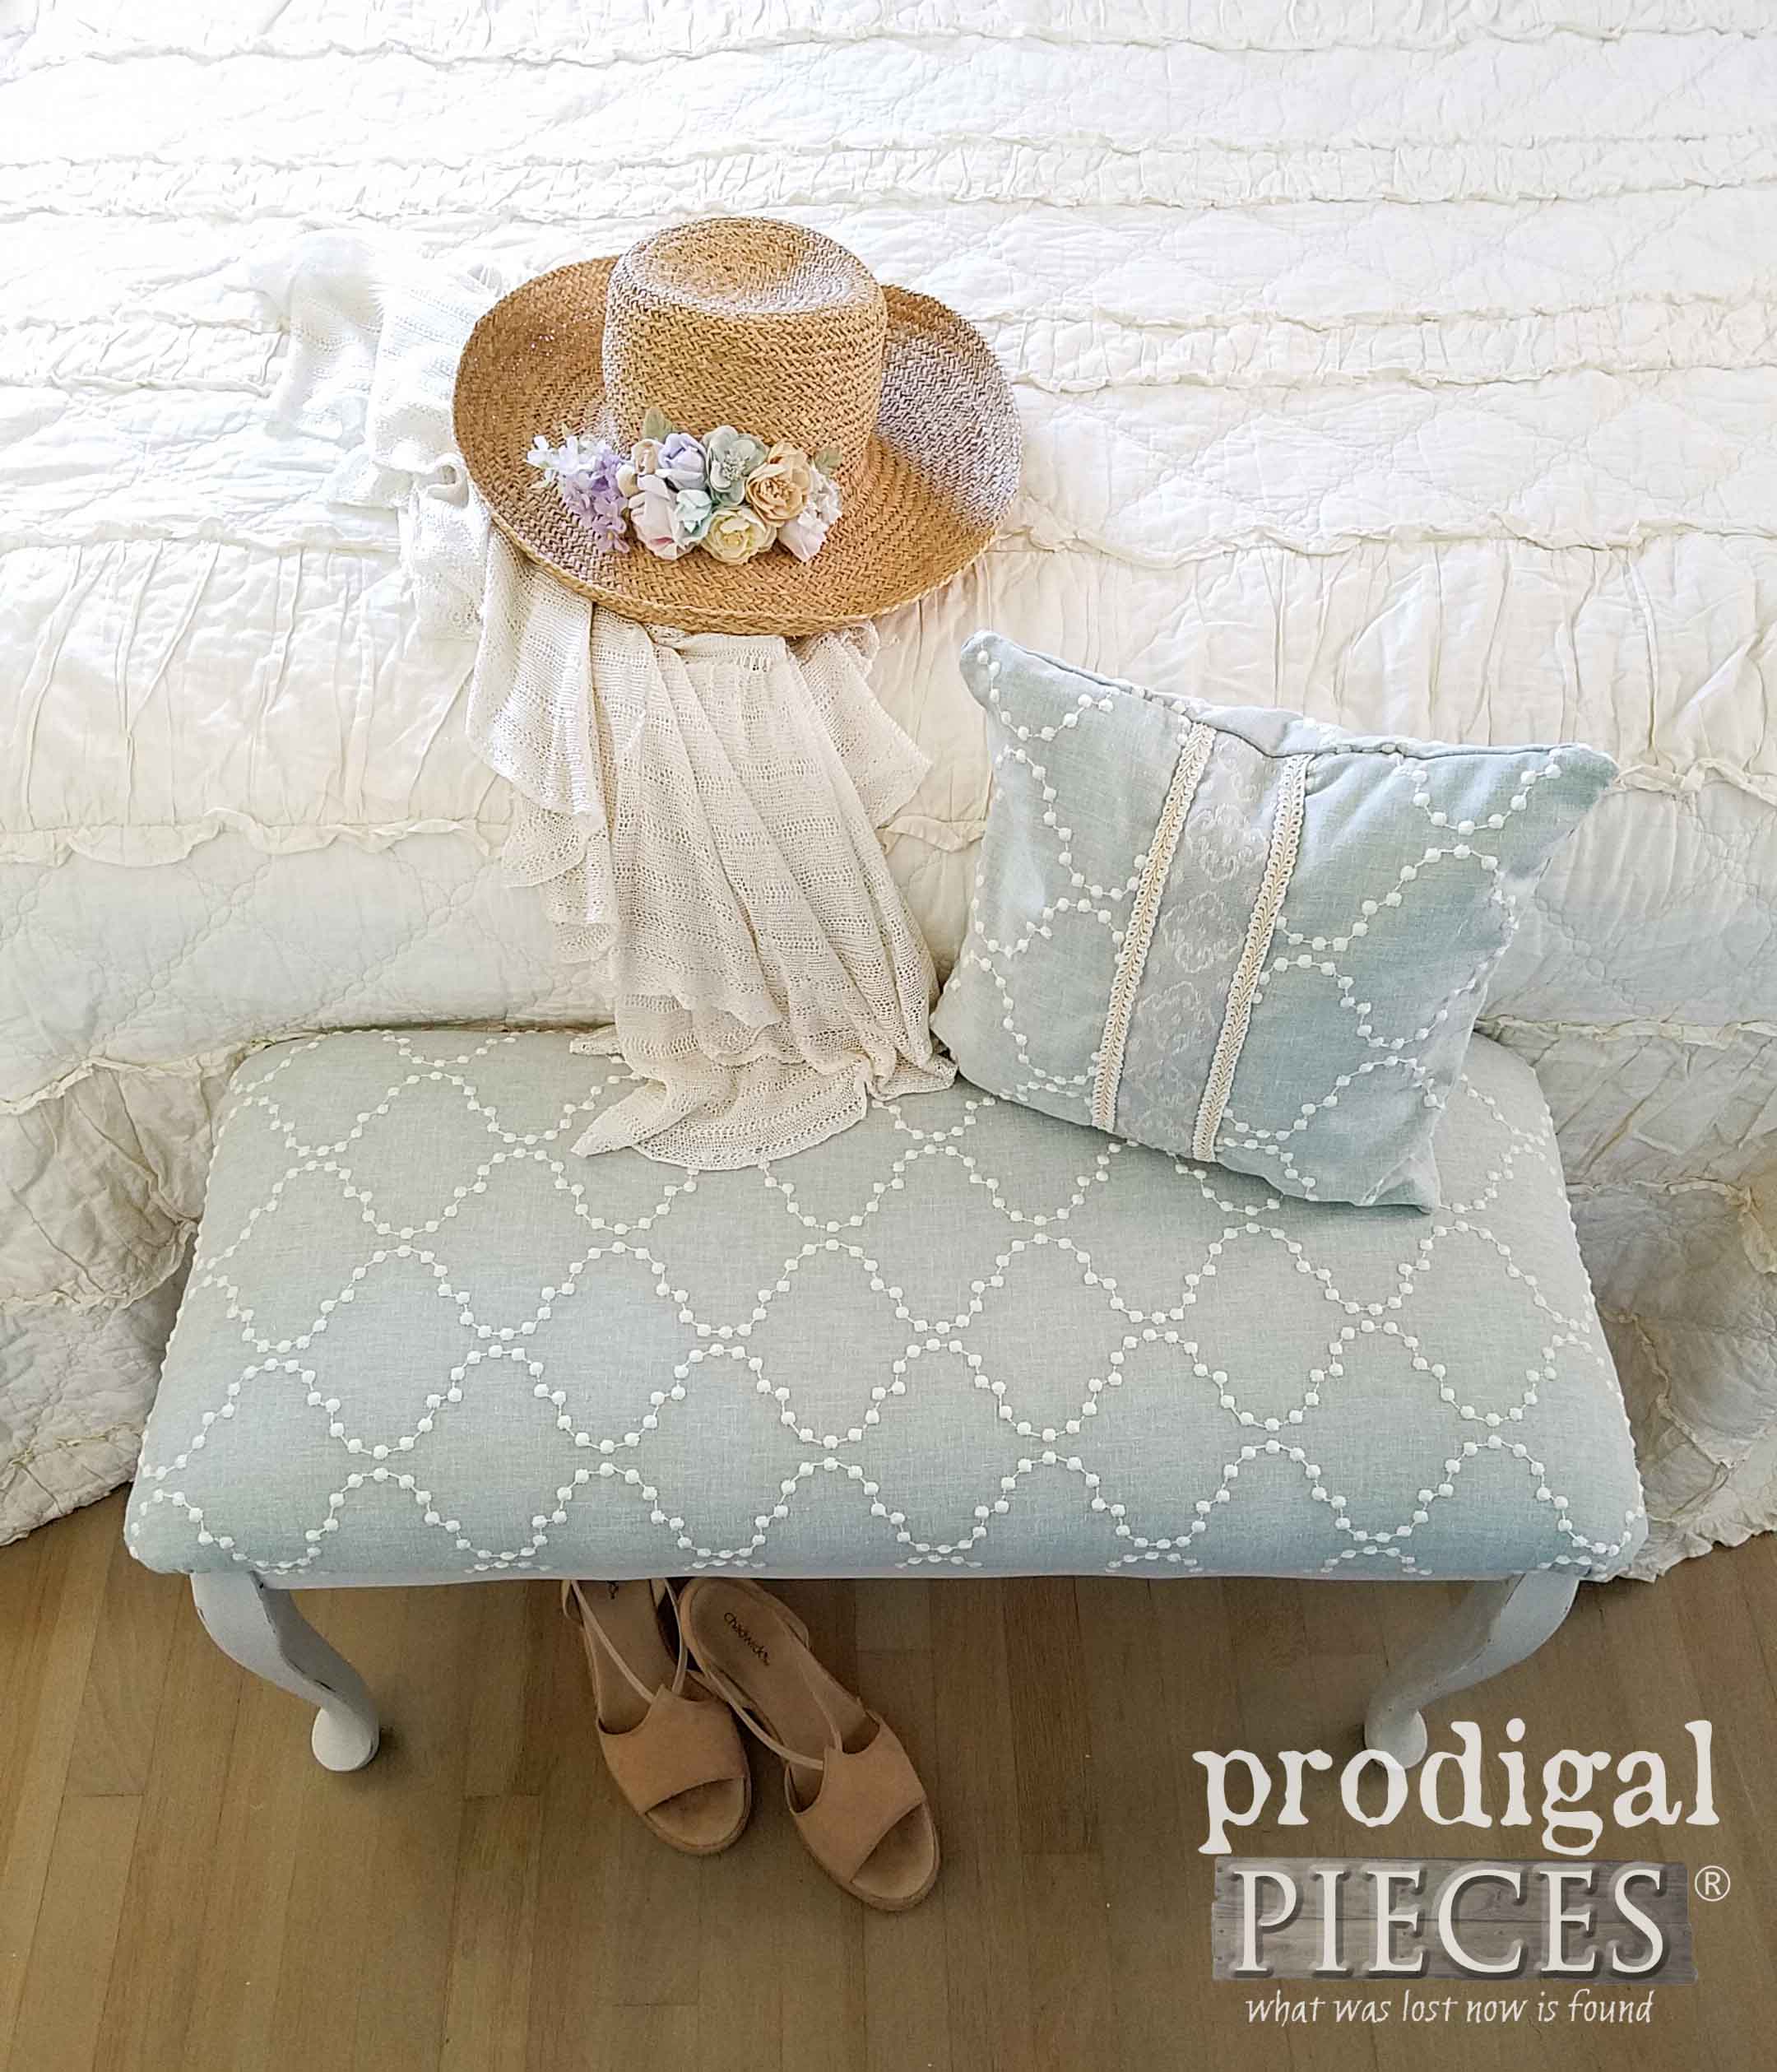 Upholstered Queen Anne Bench and Pillow Set by Larissa of Prodigal Pieces | prodigalpieces.com